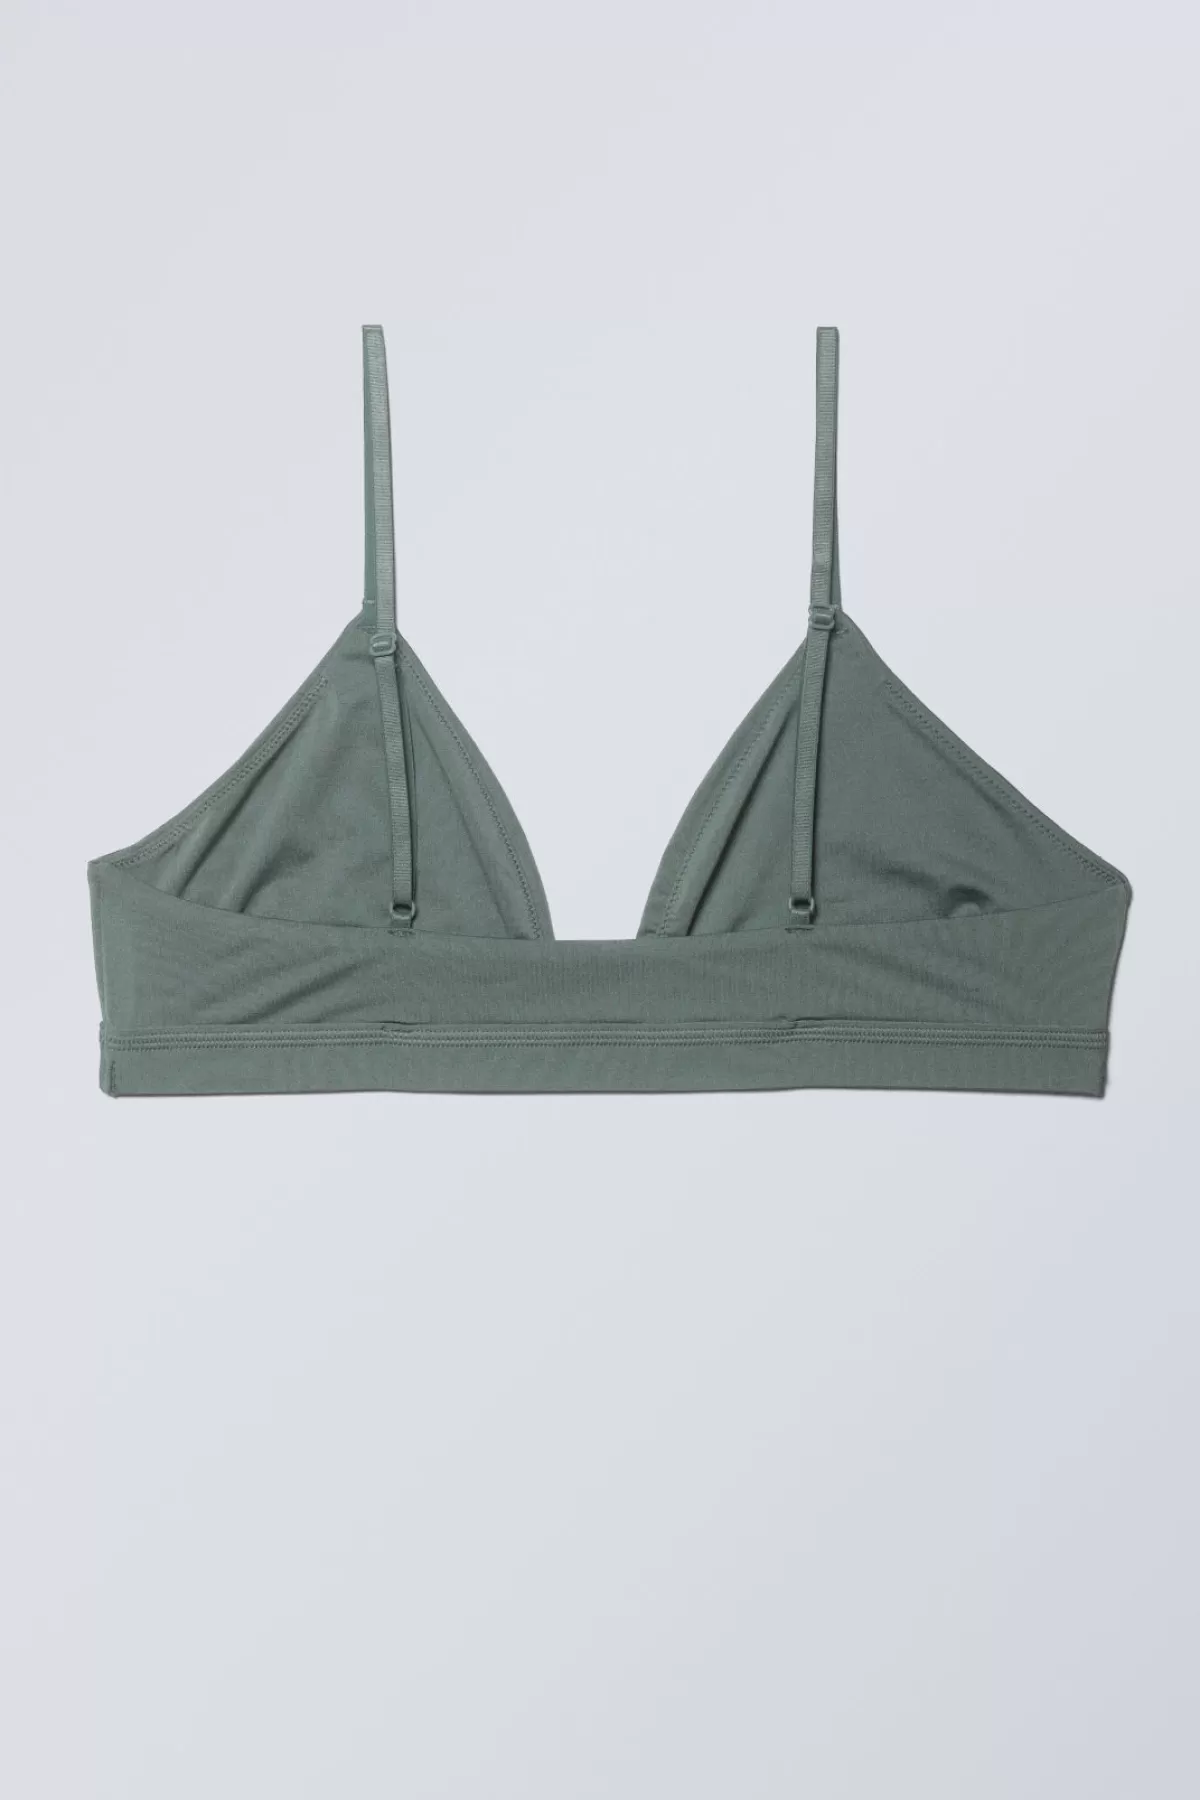 Weekday Soft Triangle Bralette Soul Dusty Turquoise Best